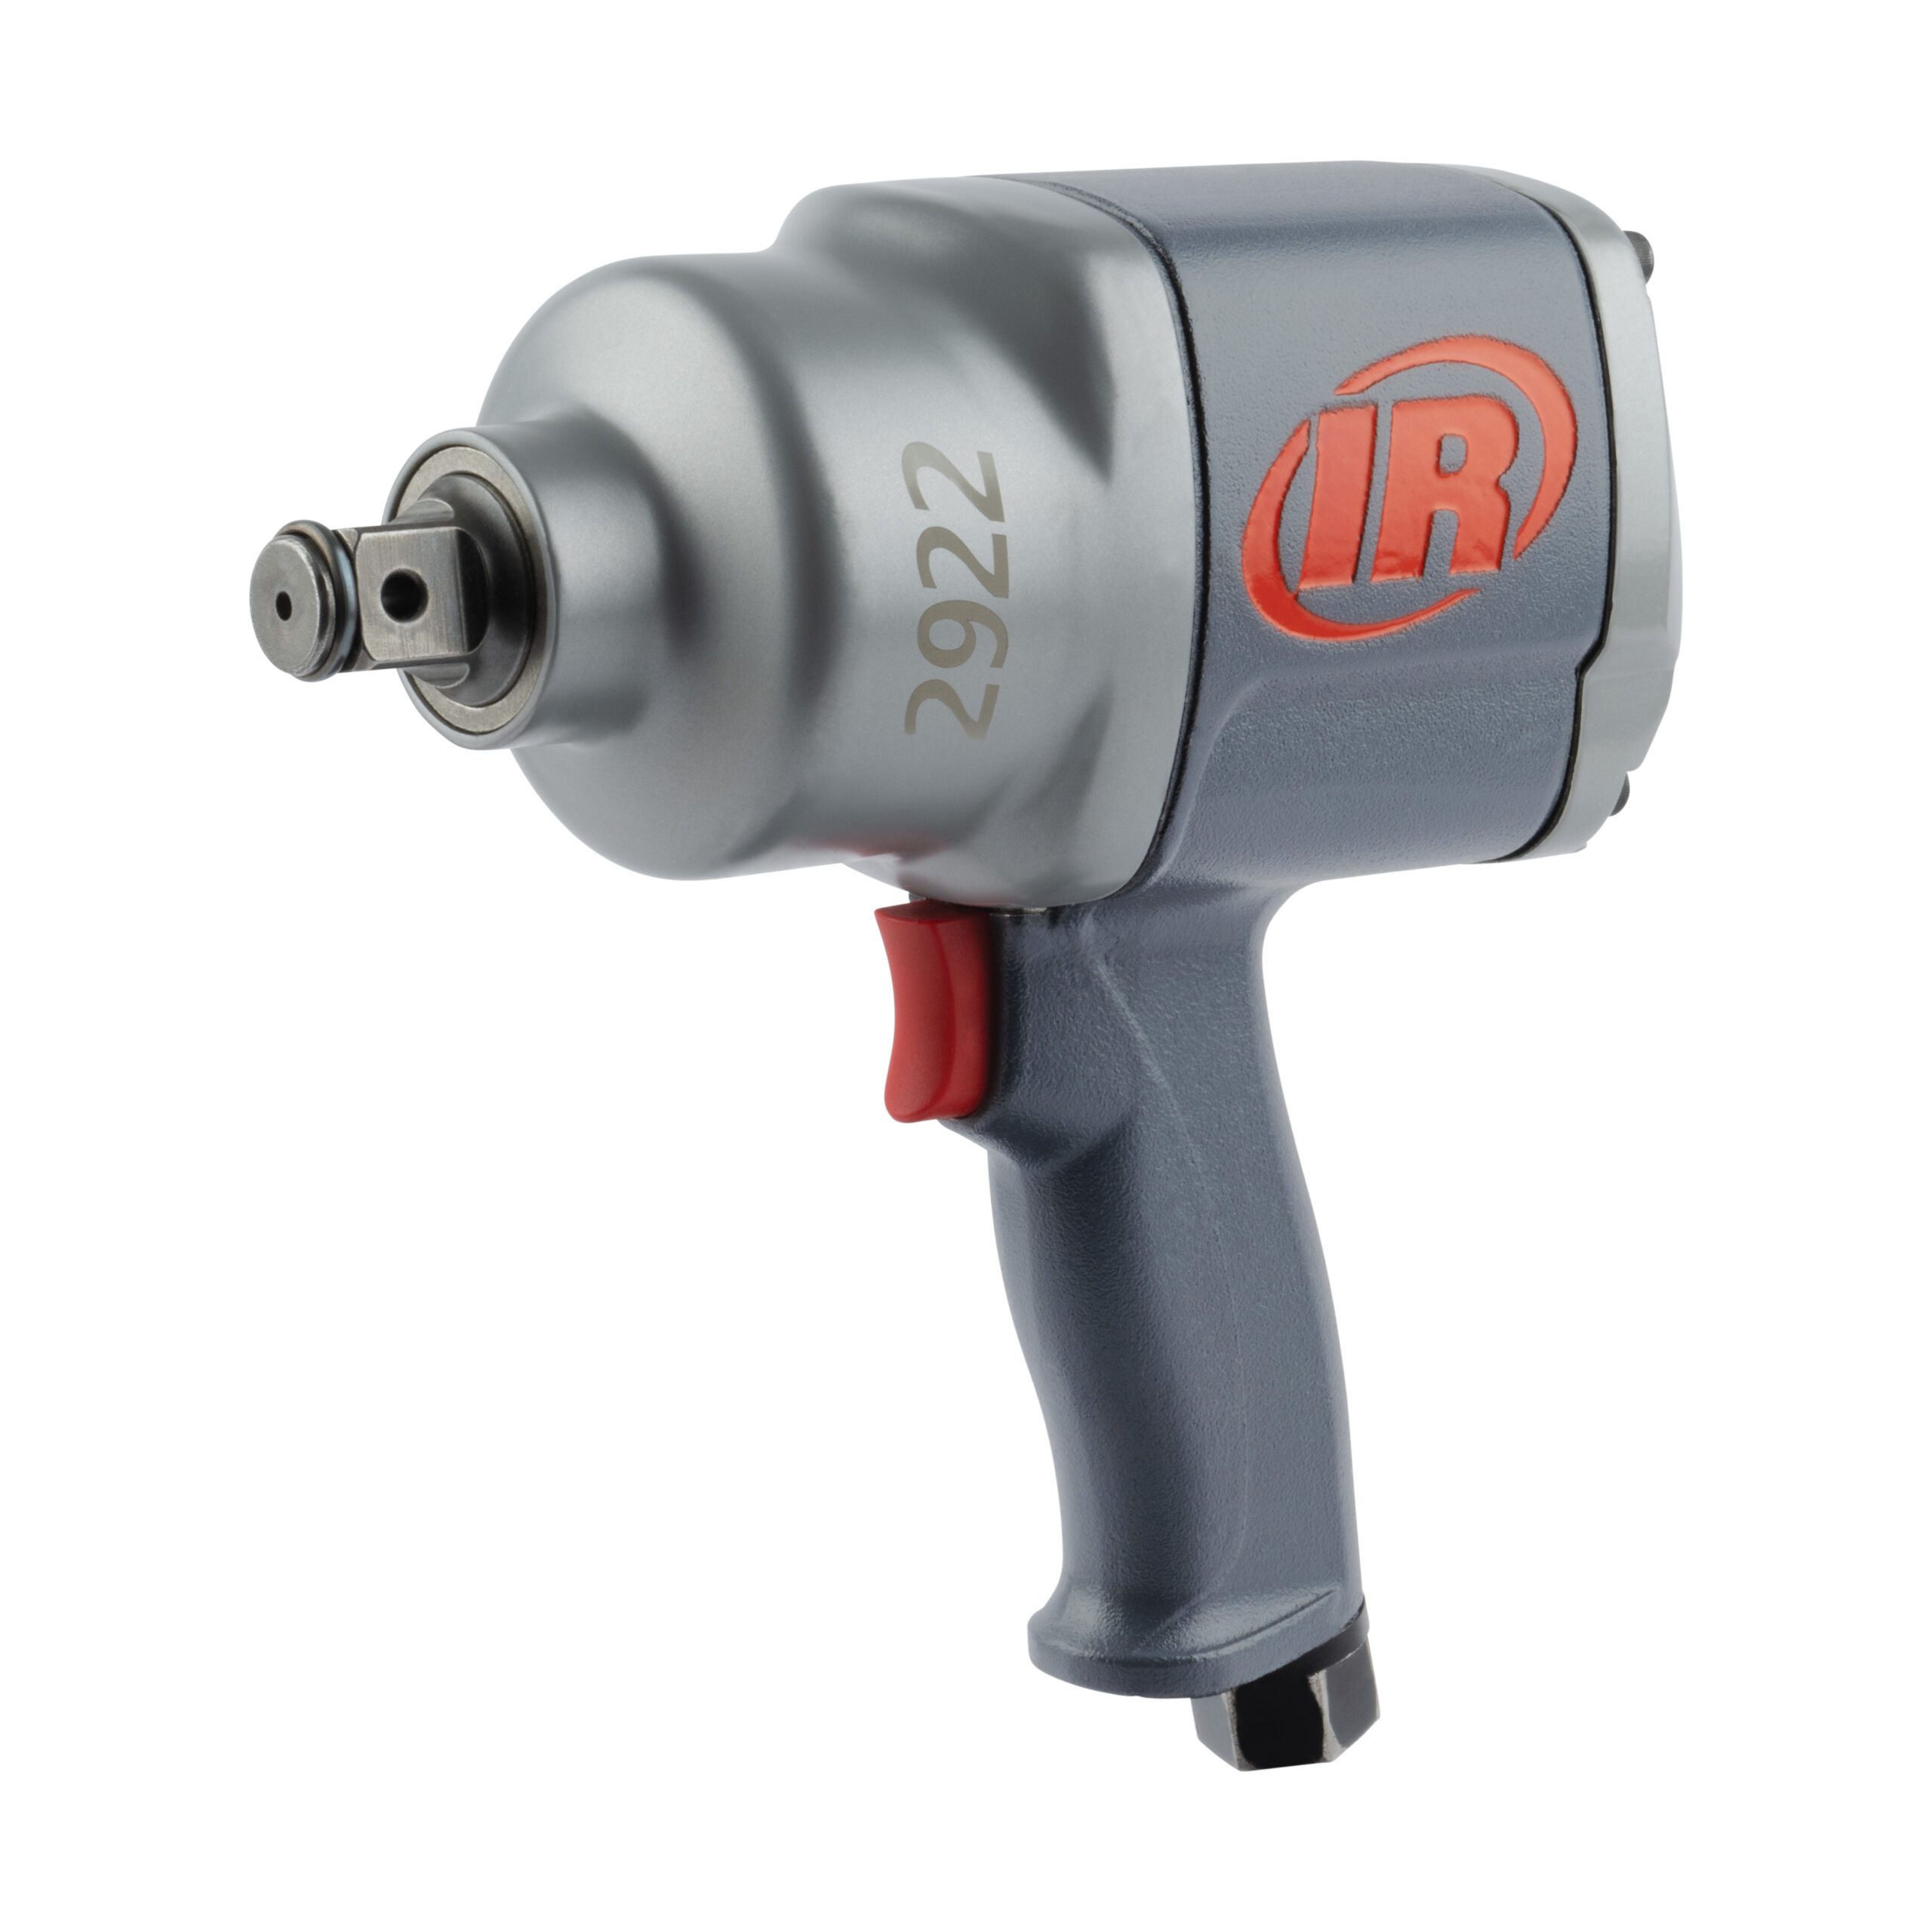 Ingersoll Rand® 2922 Series Pneumatic Impact Wrenches Combine Power,  Durability, Savings